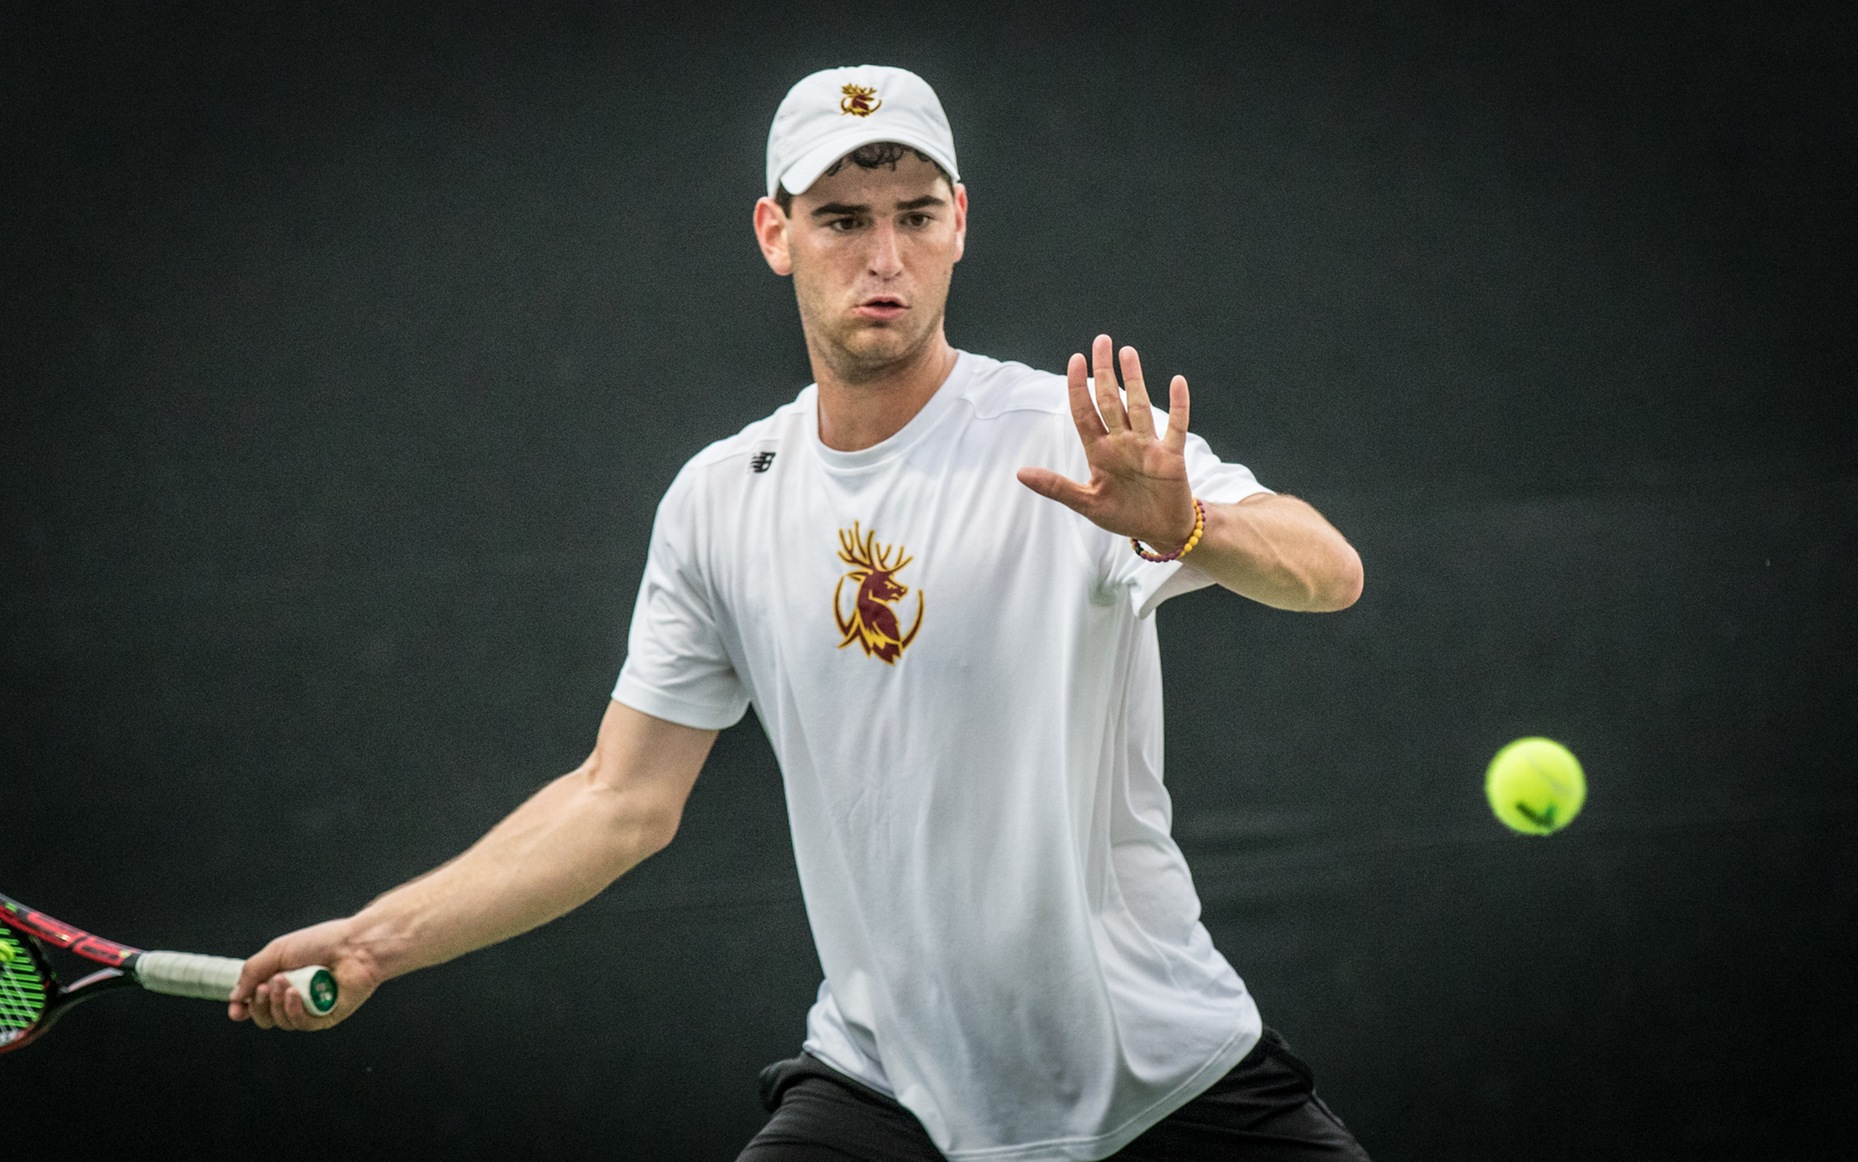 Junior Matthew Jacobs (CMC) won the deciding match at No. 6 singles against MIT on Tuesday.